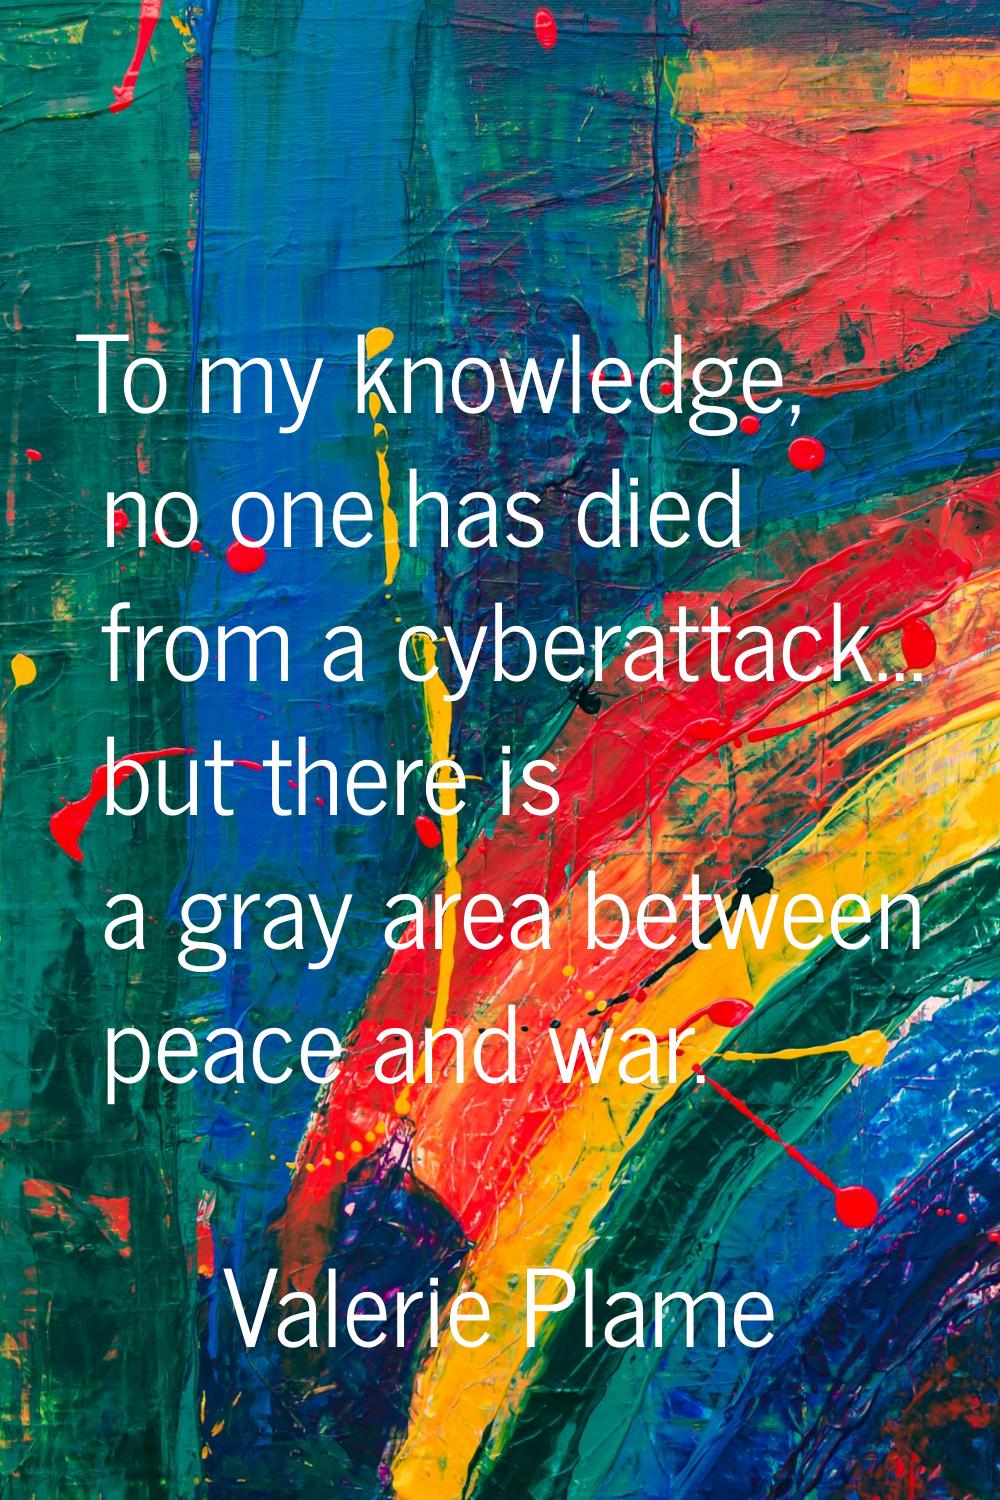 To my knowledge, no one has died from a cyberattack... but there is a gray area between peace and w